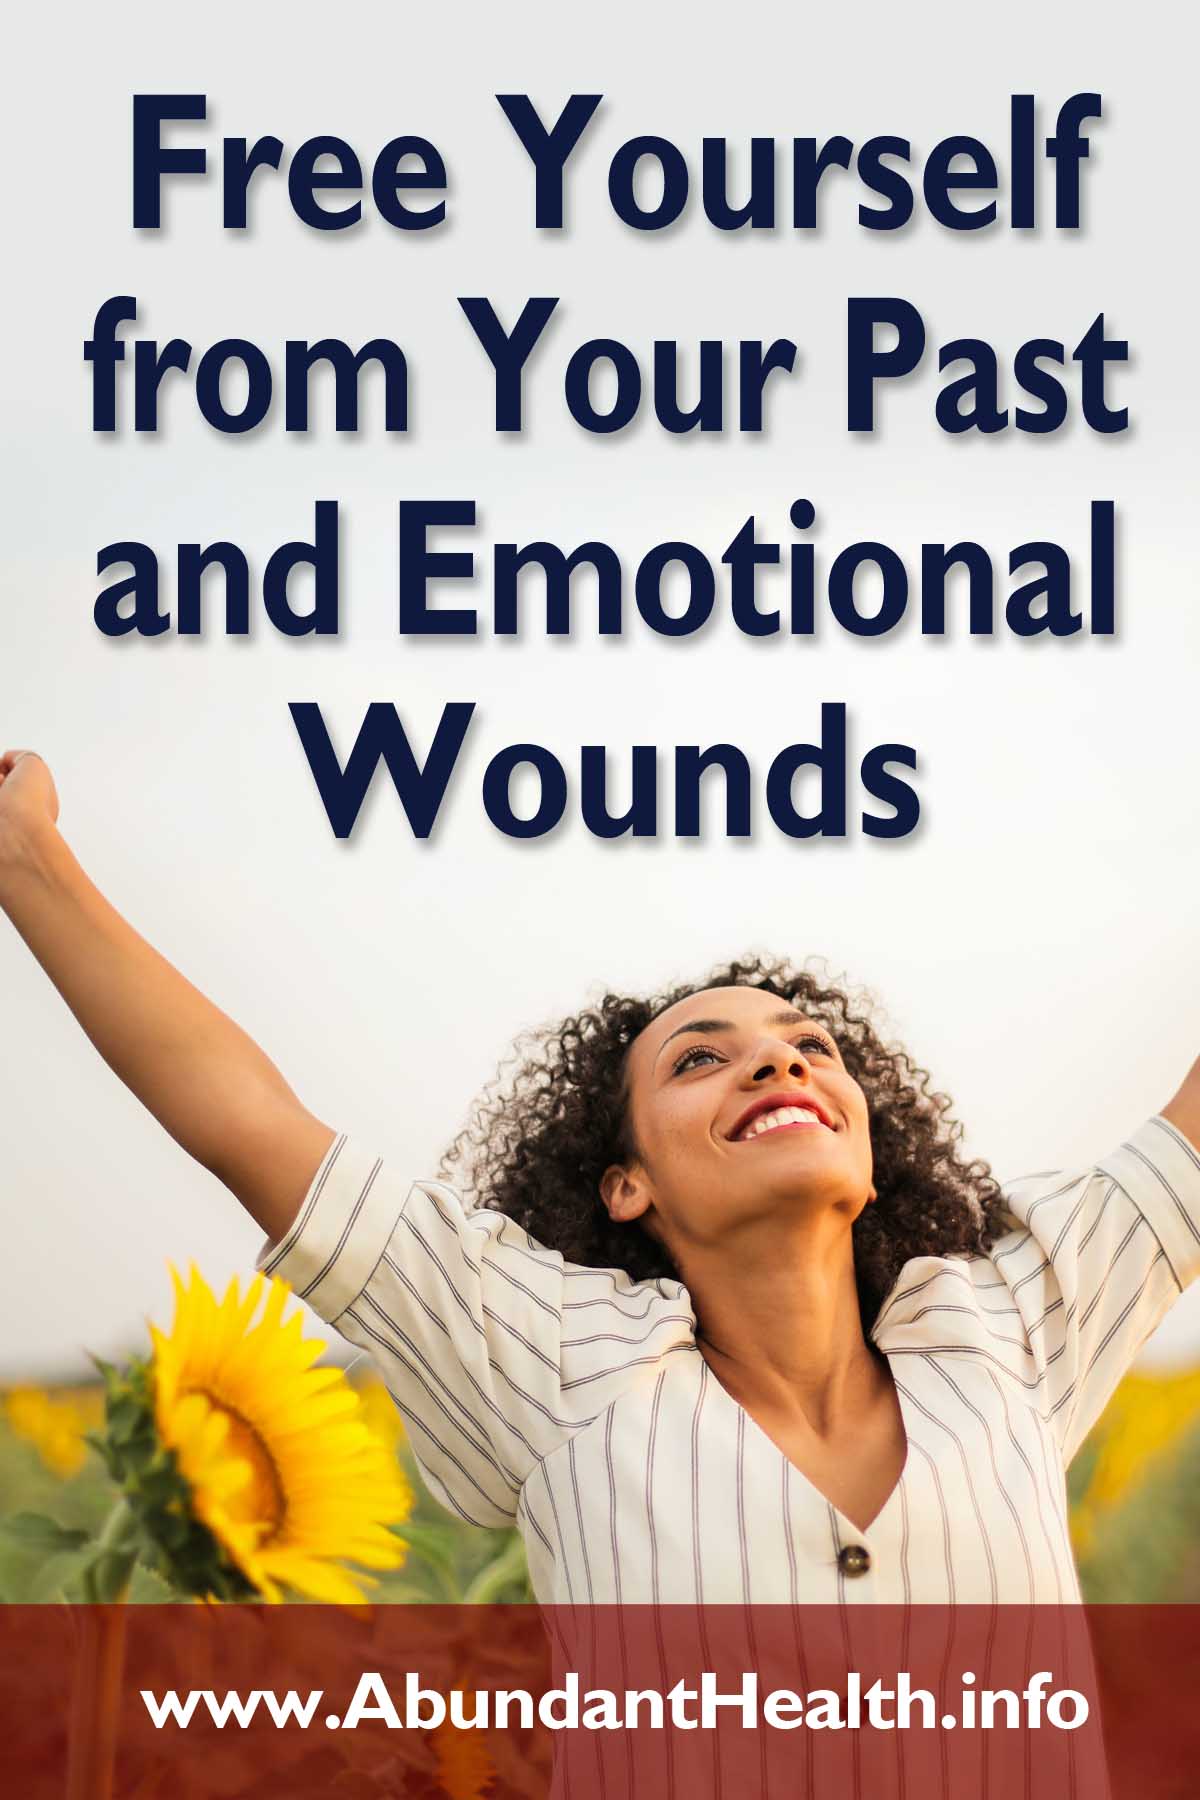 How to Free Yourself from Your Past and Emotional Wounds